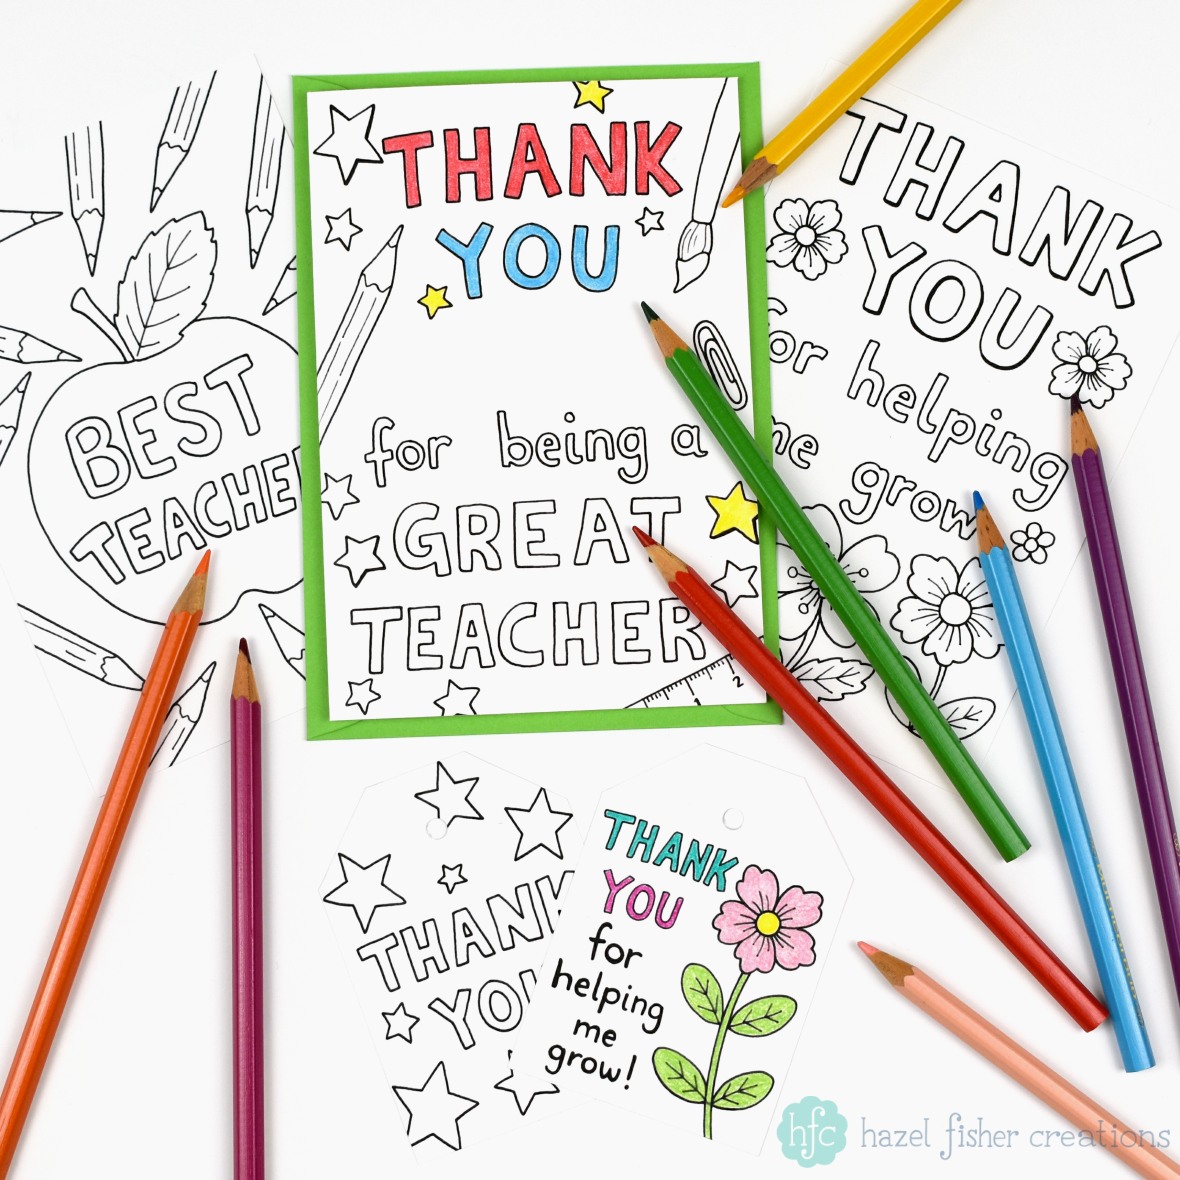 hazel-fisher-creations-gift-ideas-for-teachers-and-printable-thank-you